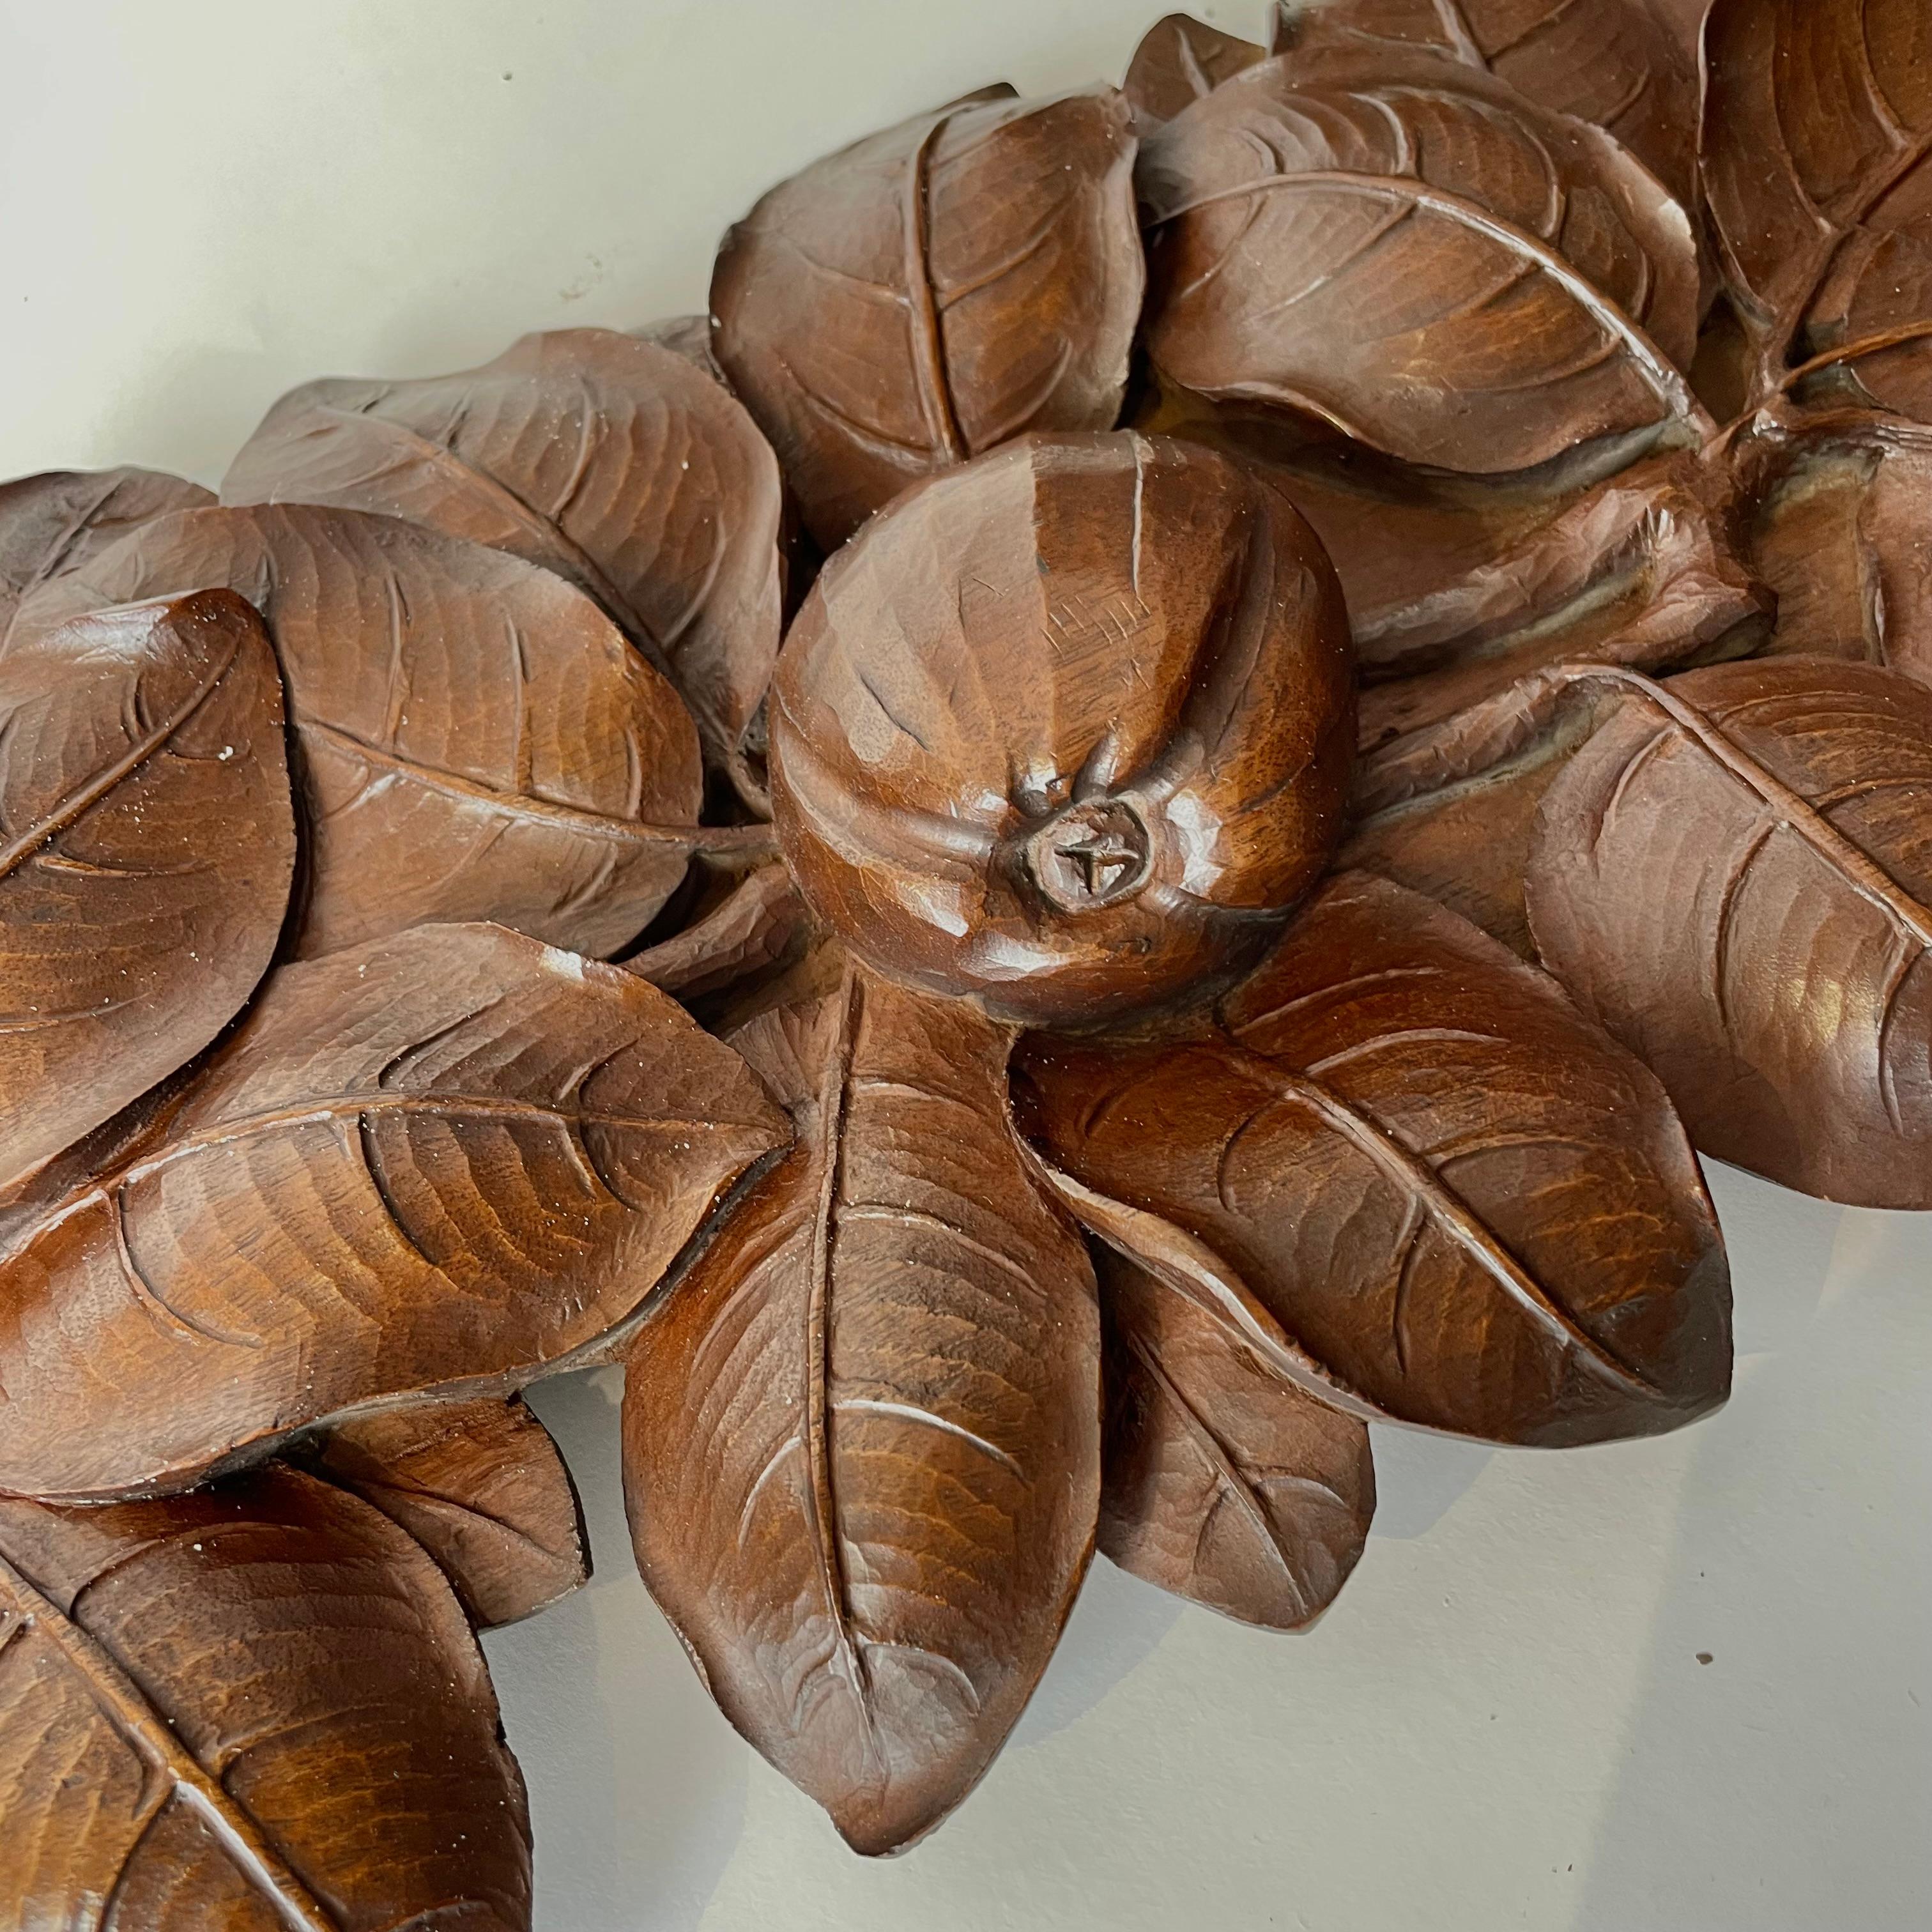 Walnut Woodcarved Decorative Element Depicting Apples Foliage Early 20th Century For Sale 4